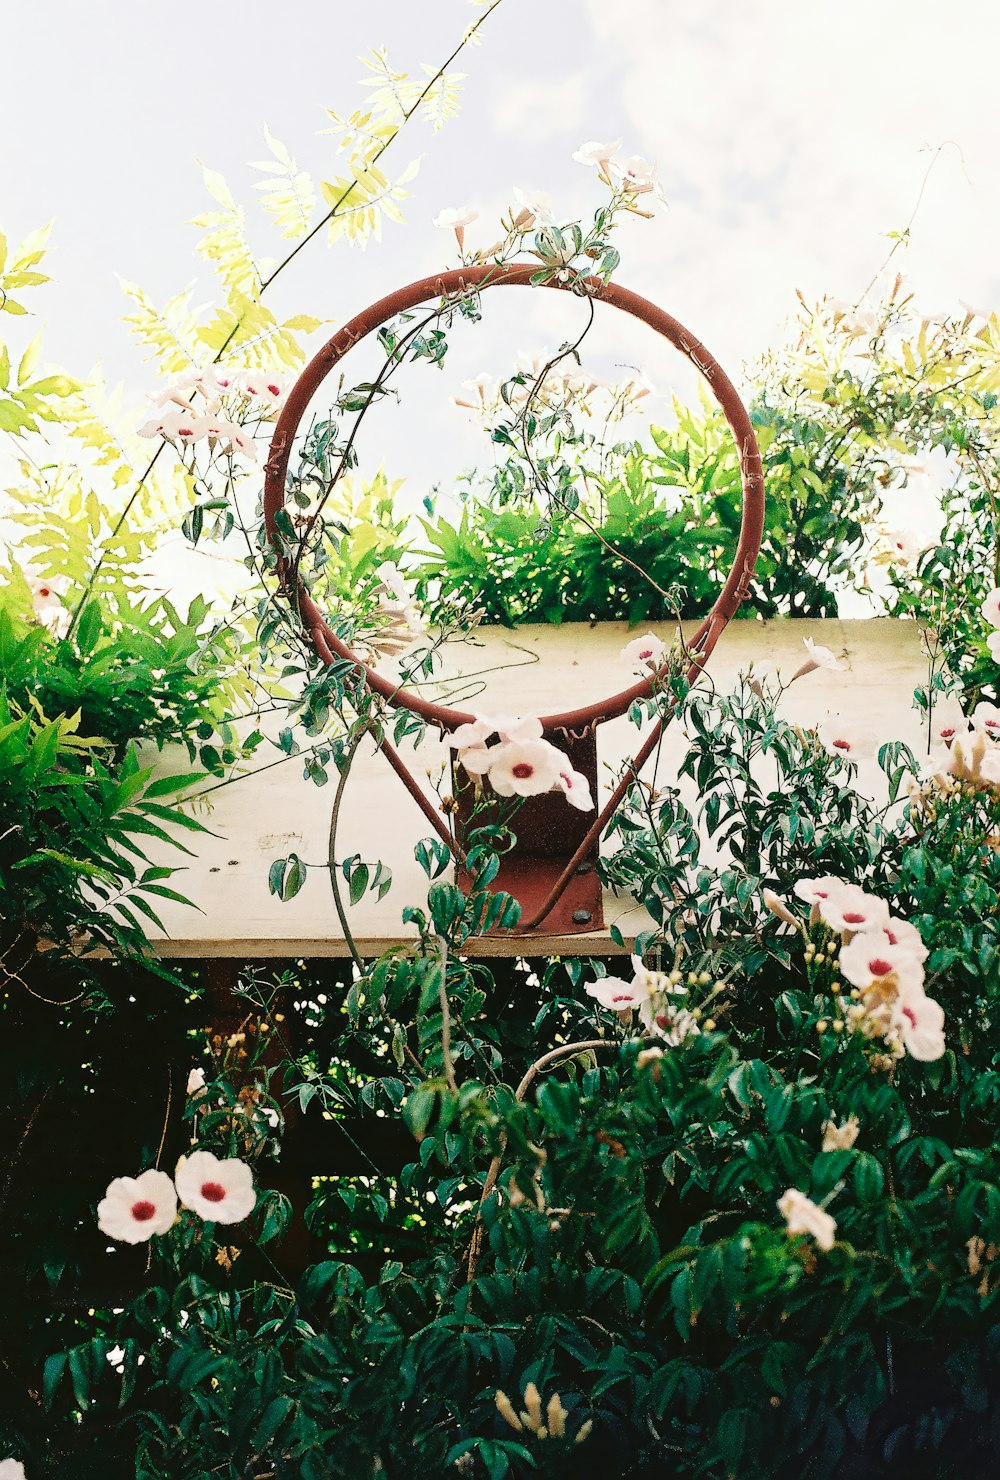 a circular object in the middle of a garden